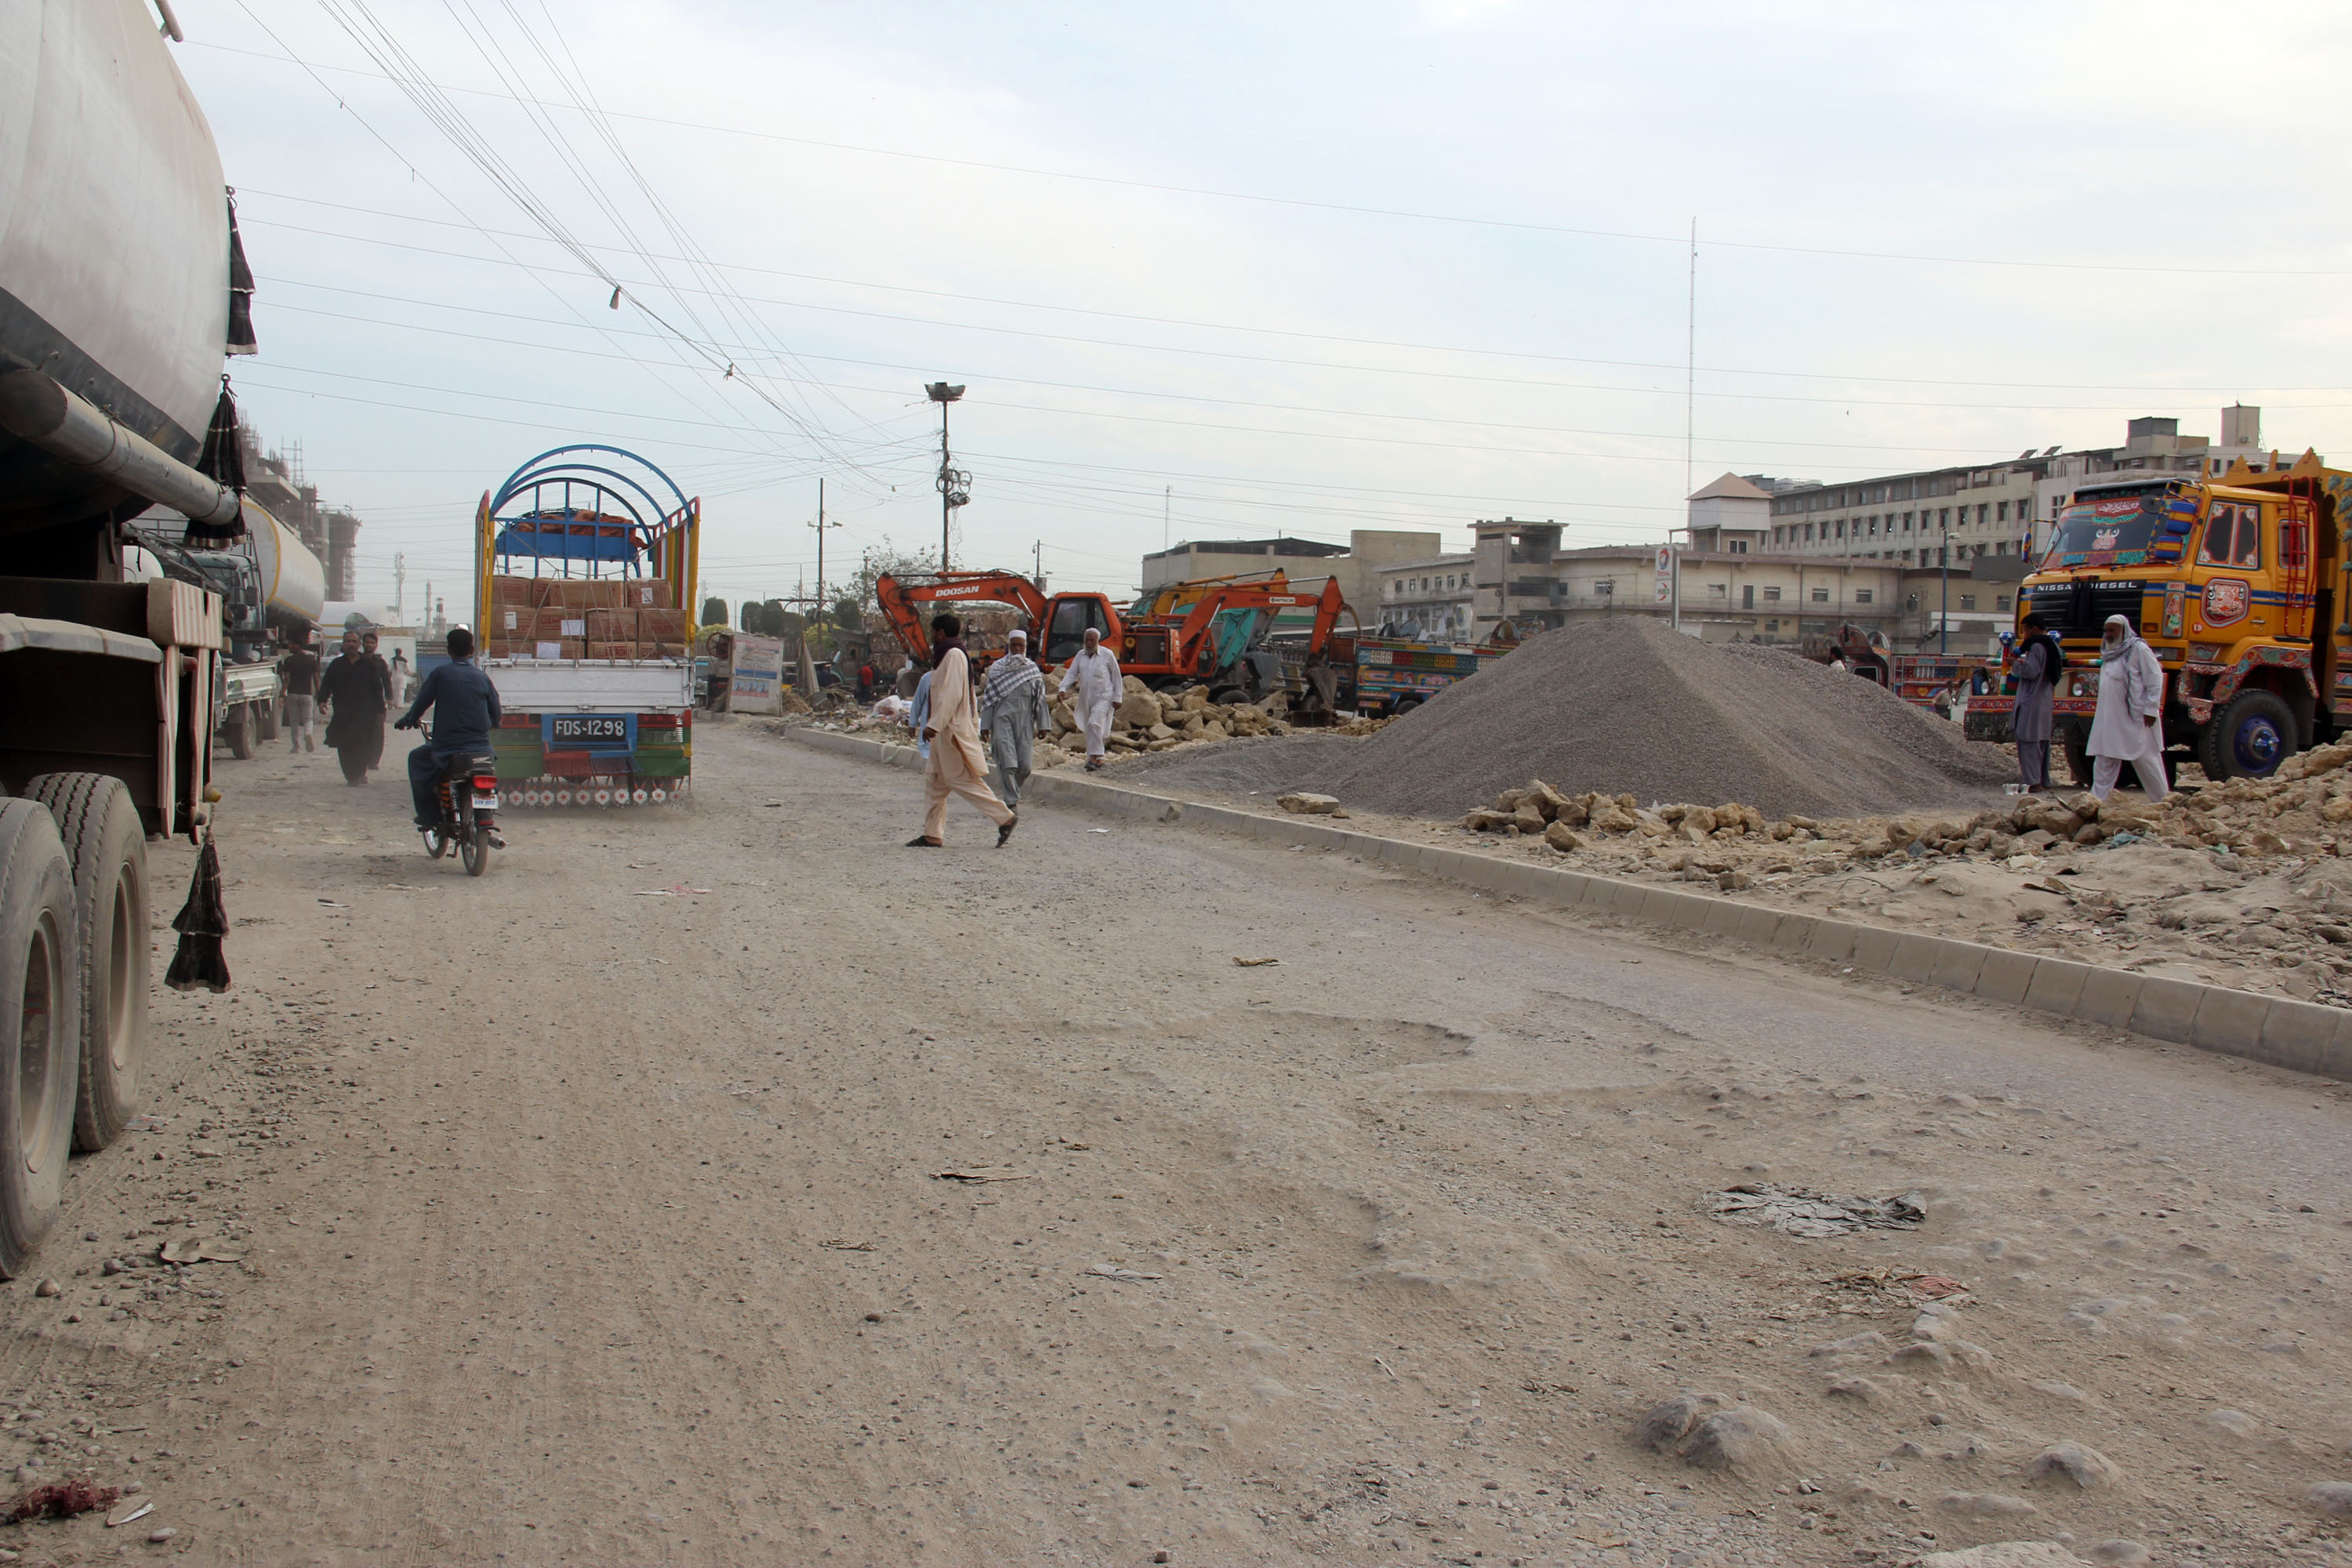 The median between the roads has been encroached by sand and gravel mafia. PHOTO: AYESHA MIR/EXPRESS